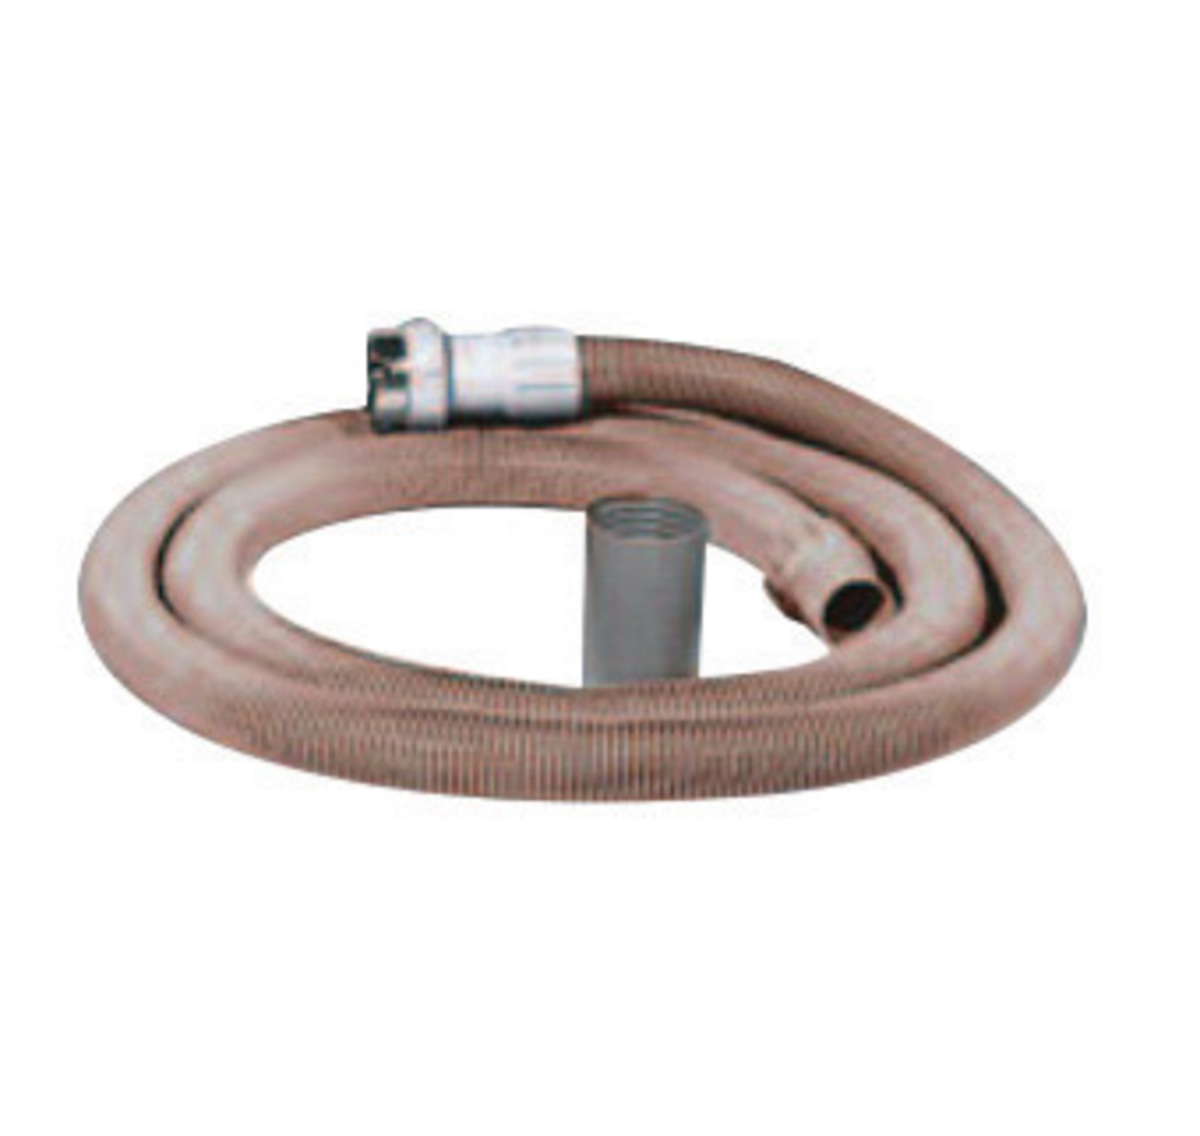 Air Systems International Metal Hose-To-Hose Coupler For Use With HEPA Vacuum System